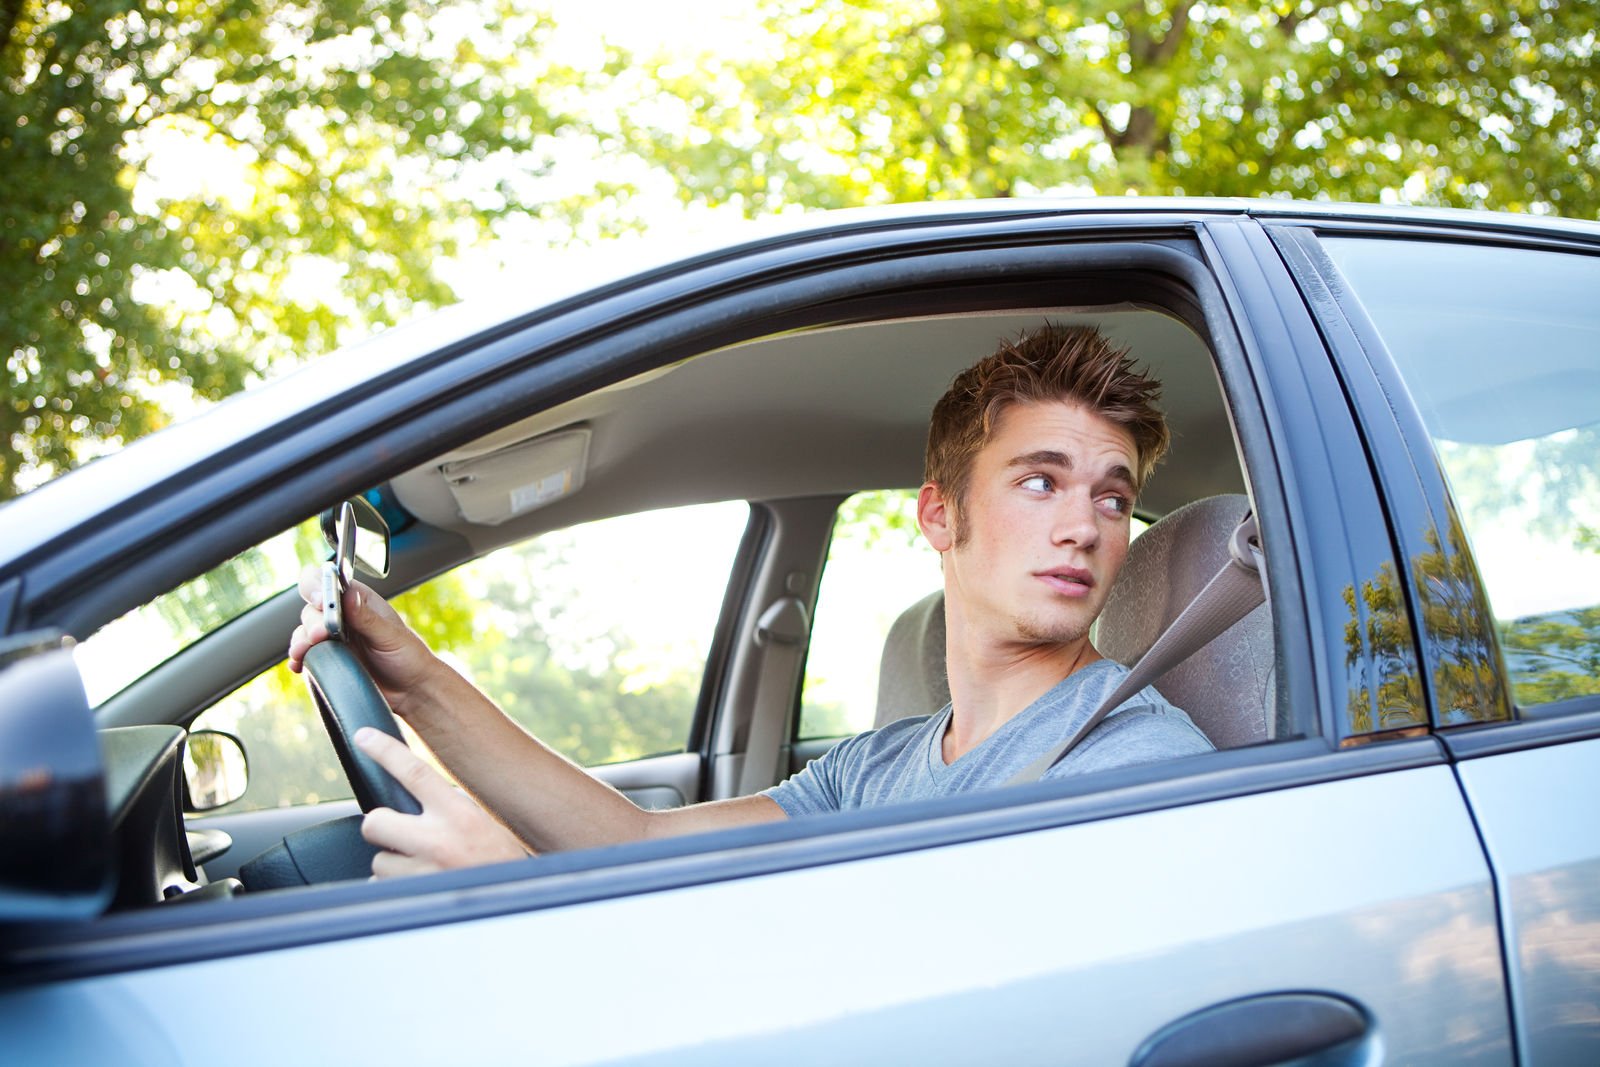 Does my car insurance cover other drivers?